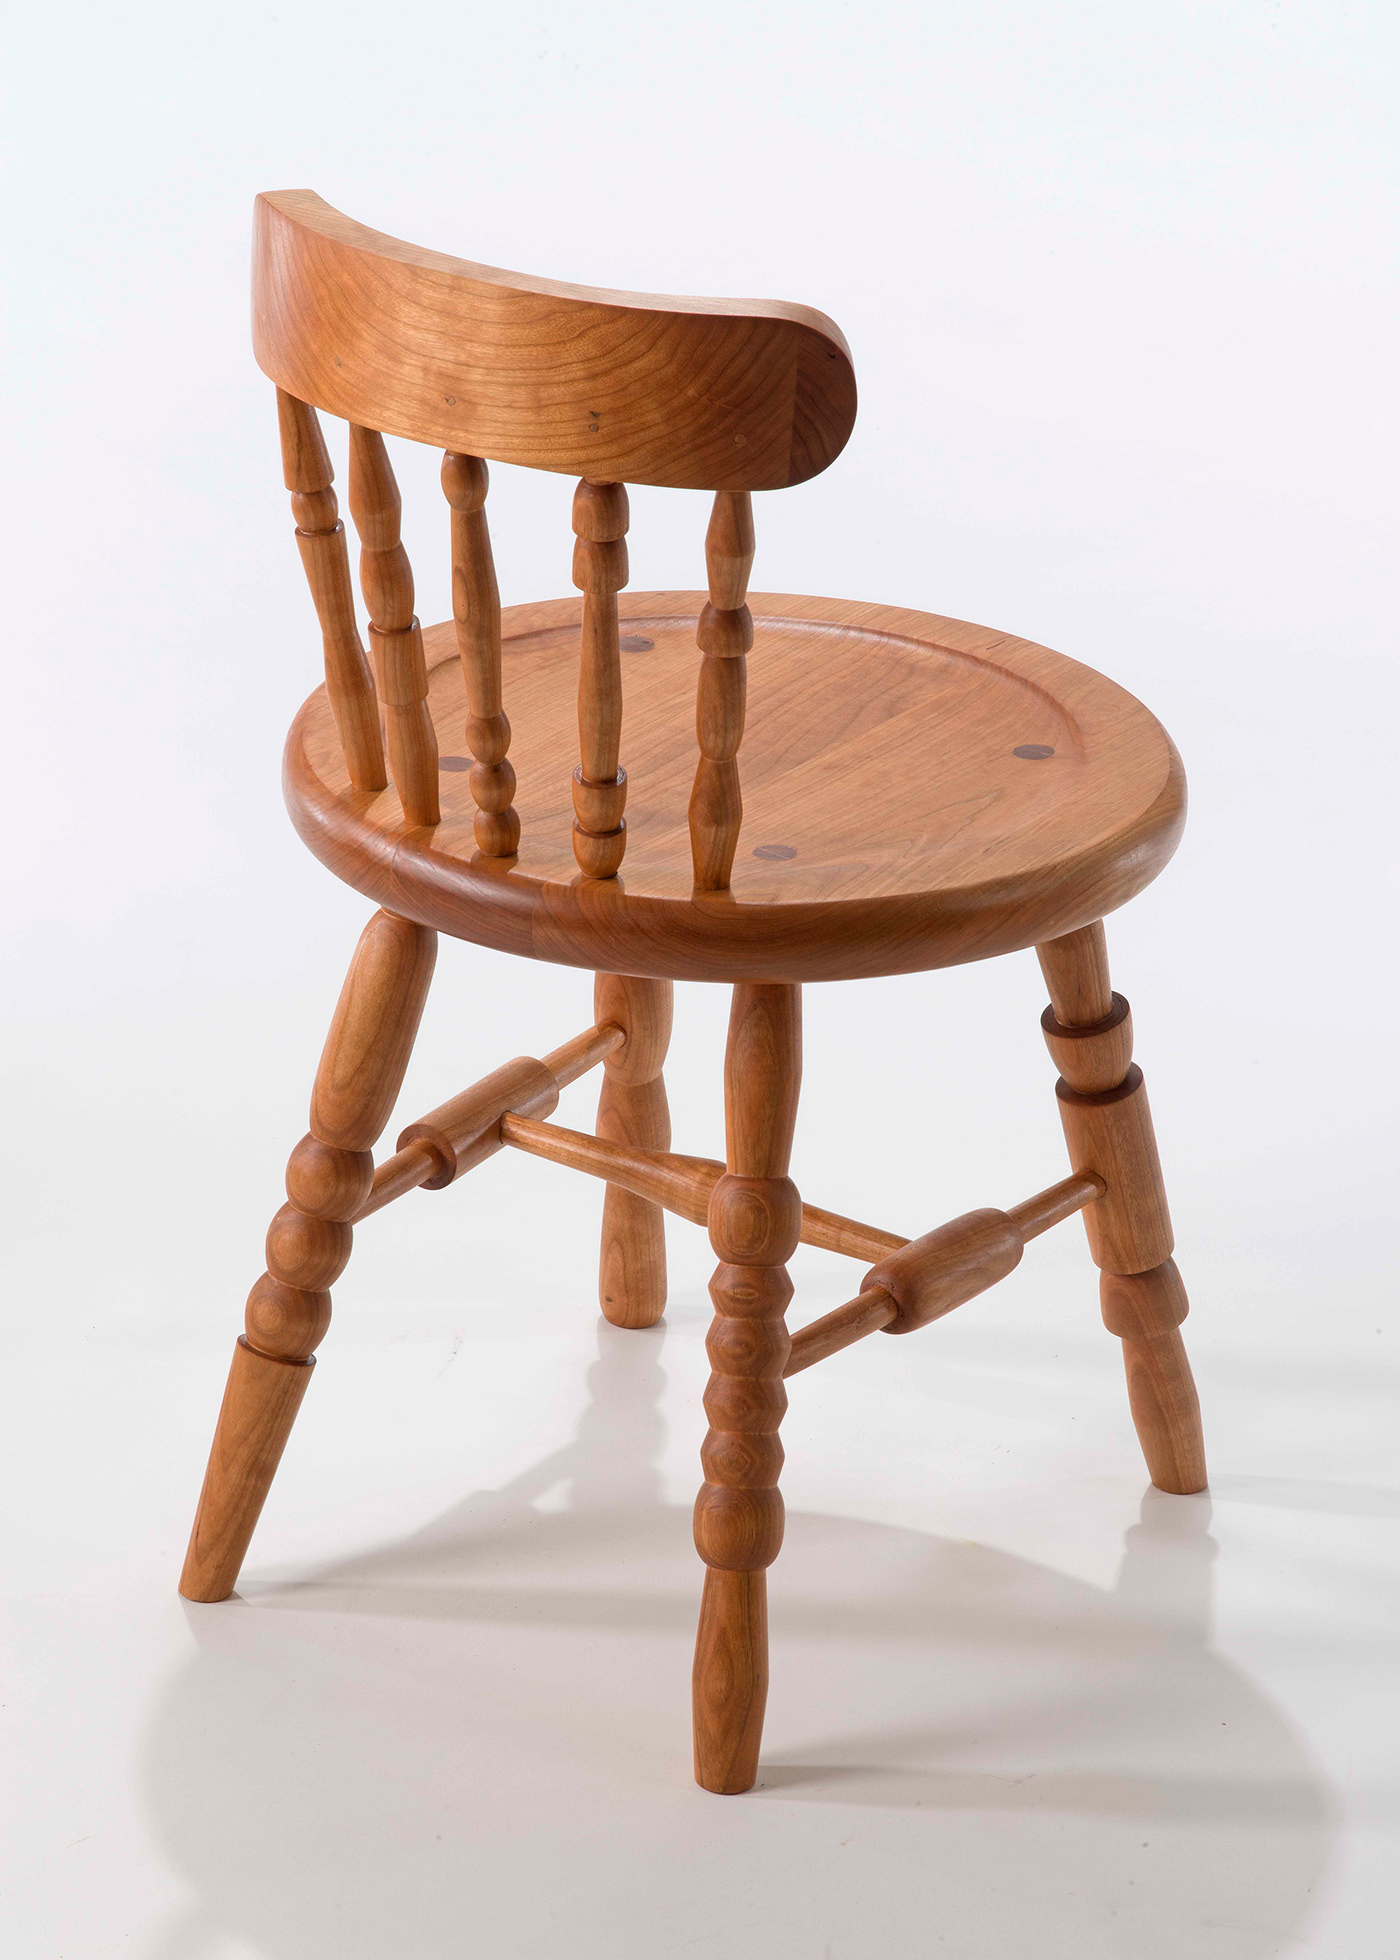 woodworking furniture furniture design  wood turning sculpture cherry windsor windsor chair chair